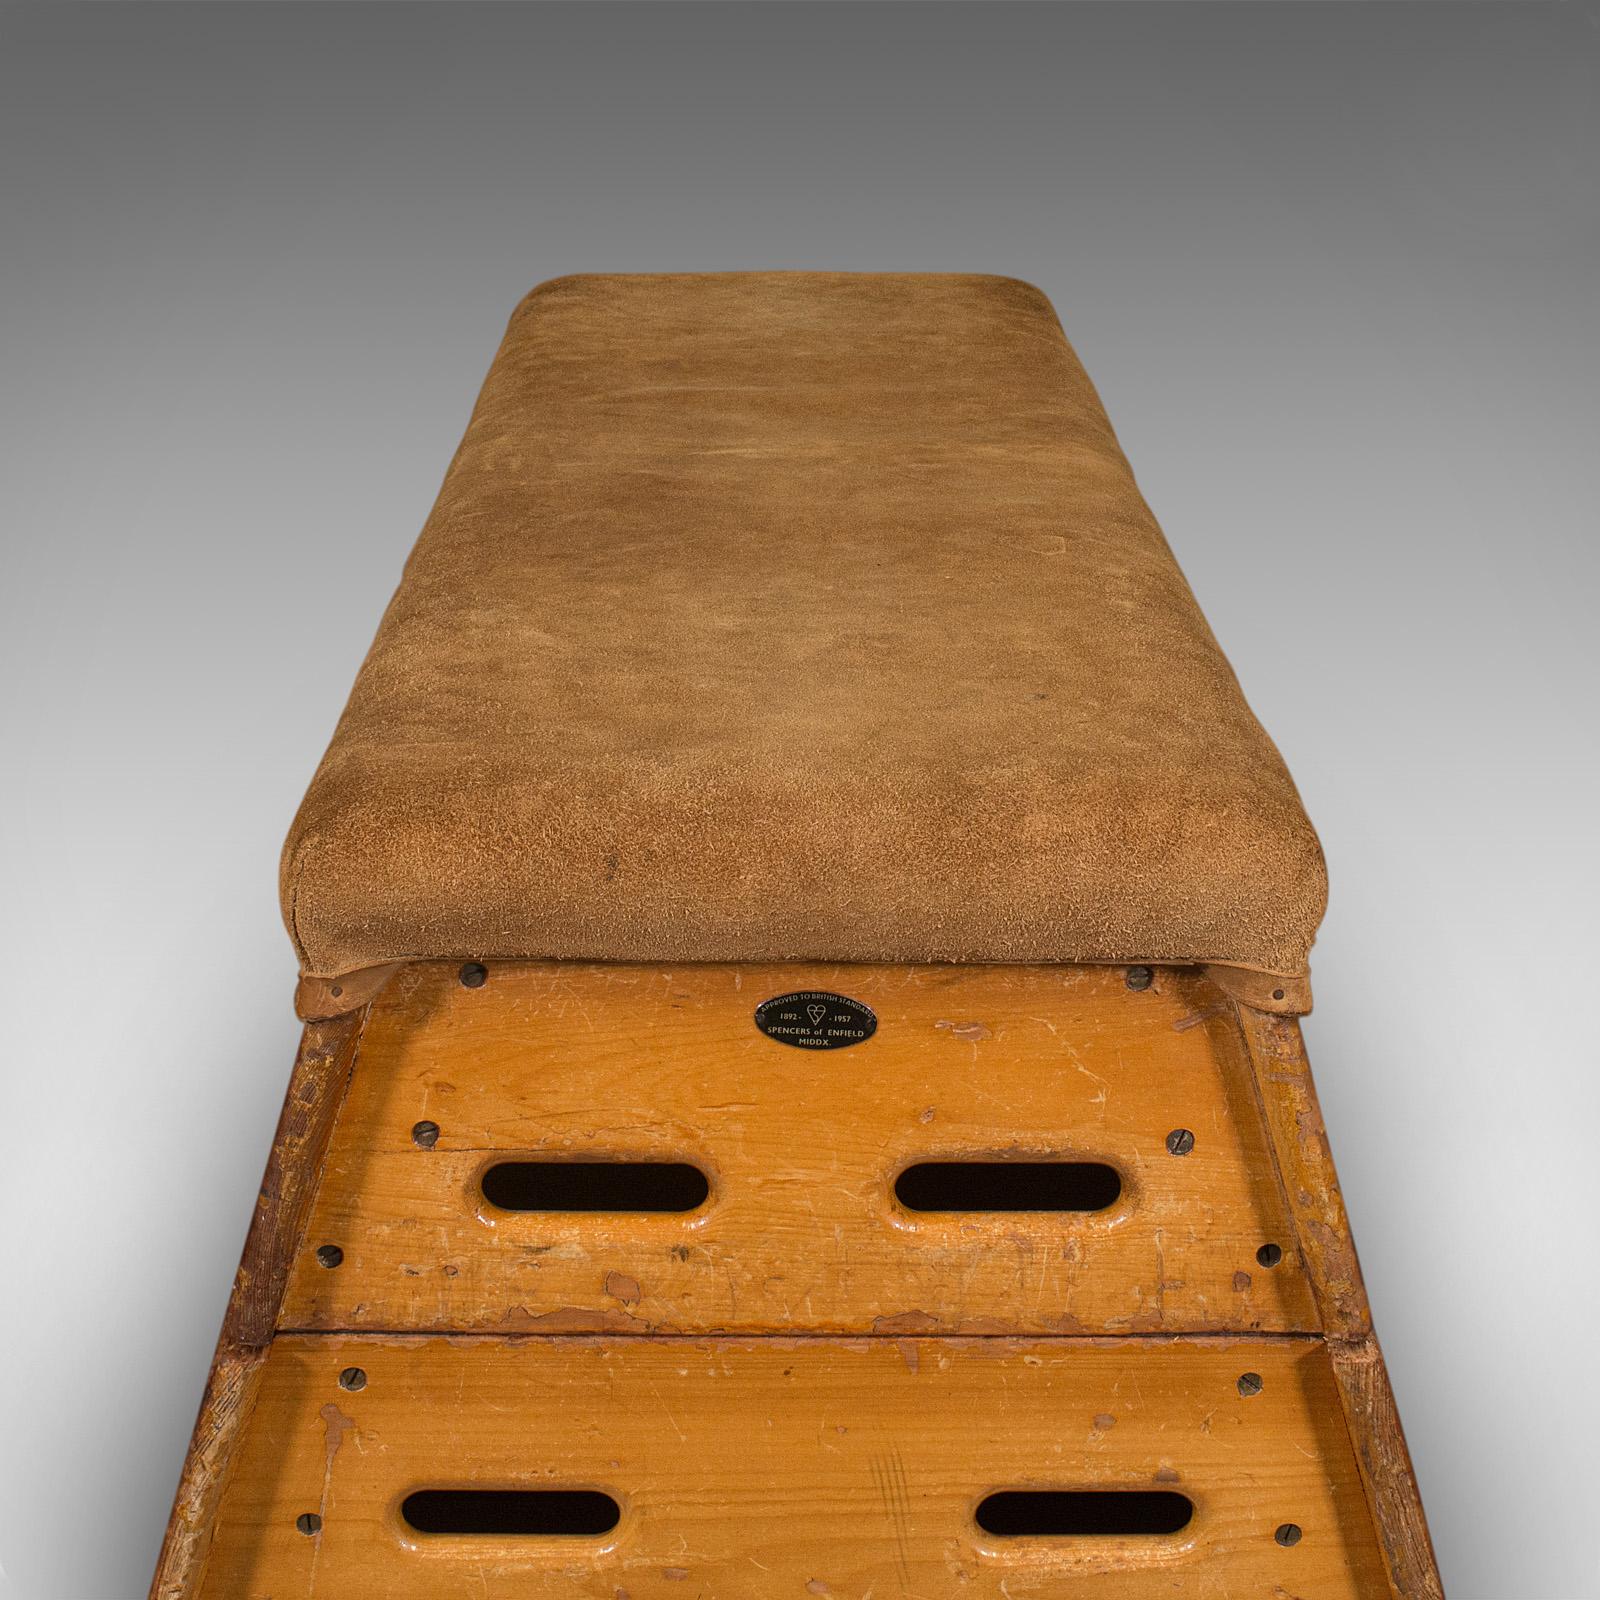 Vintage Box Vault, English, Beech, Suede Leather, Gymnastic Apparatus, C.1960 For Sale 2